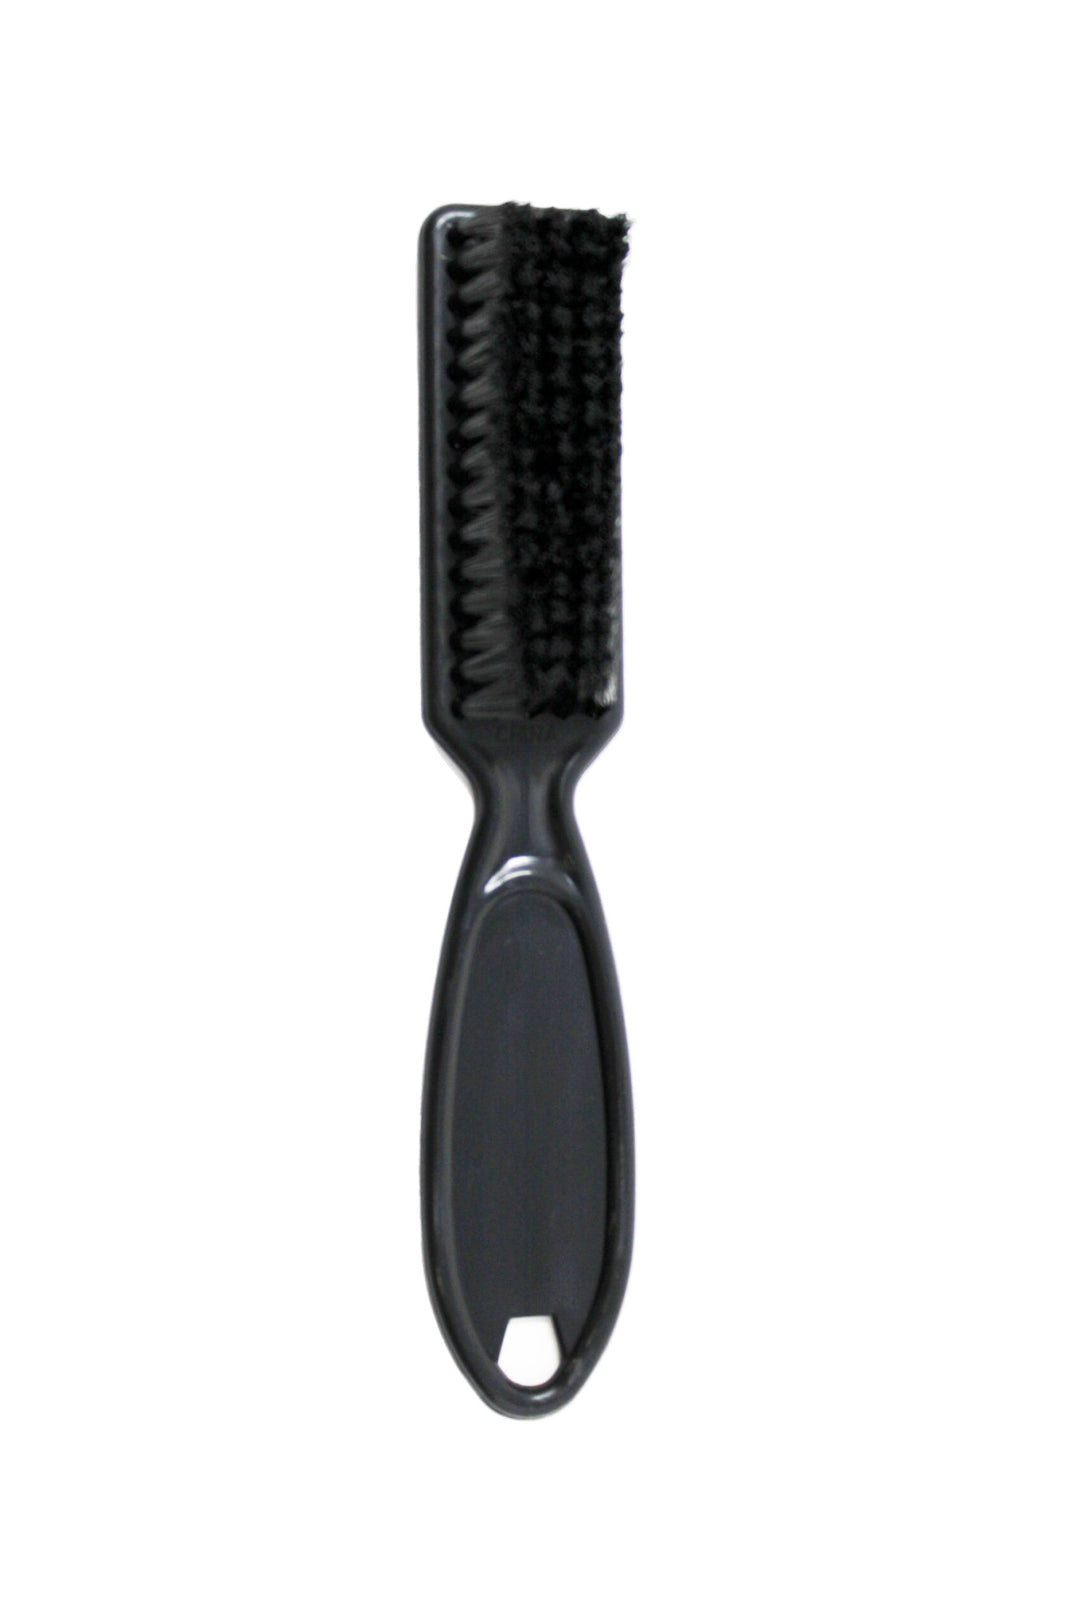 

The Shave Factory Brush for Soft Bristles Cleaning Set